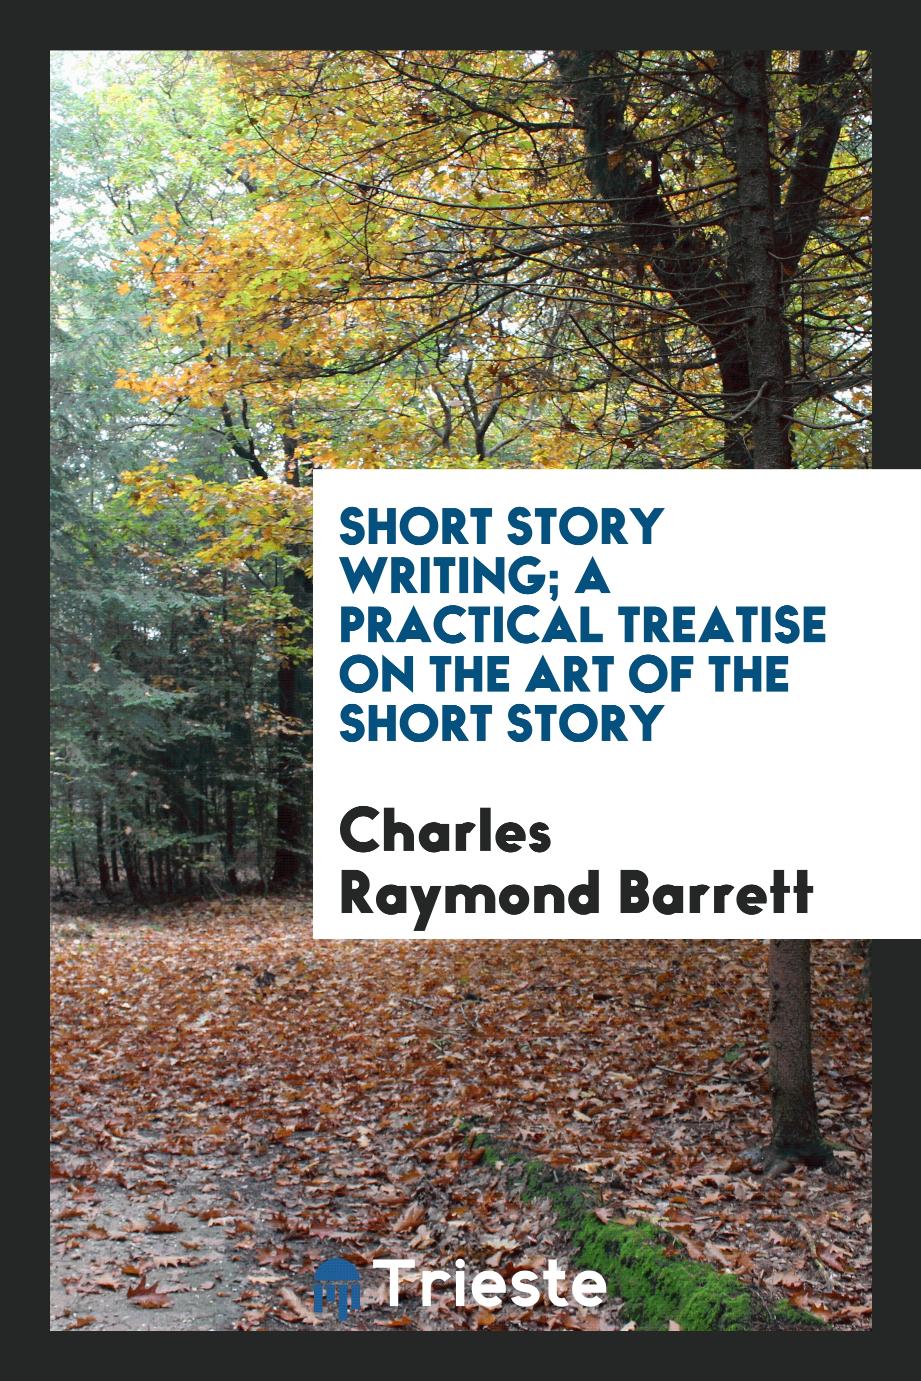 Short story writing; a practical treatise on the art of the short story